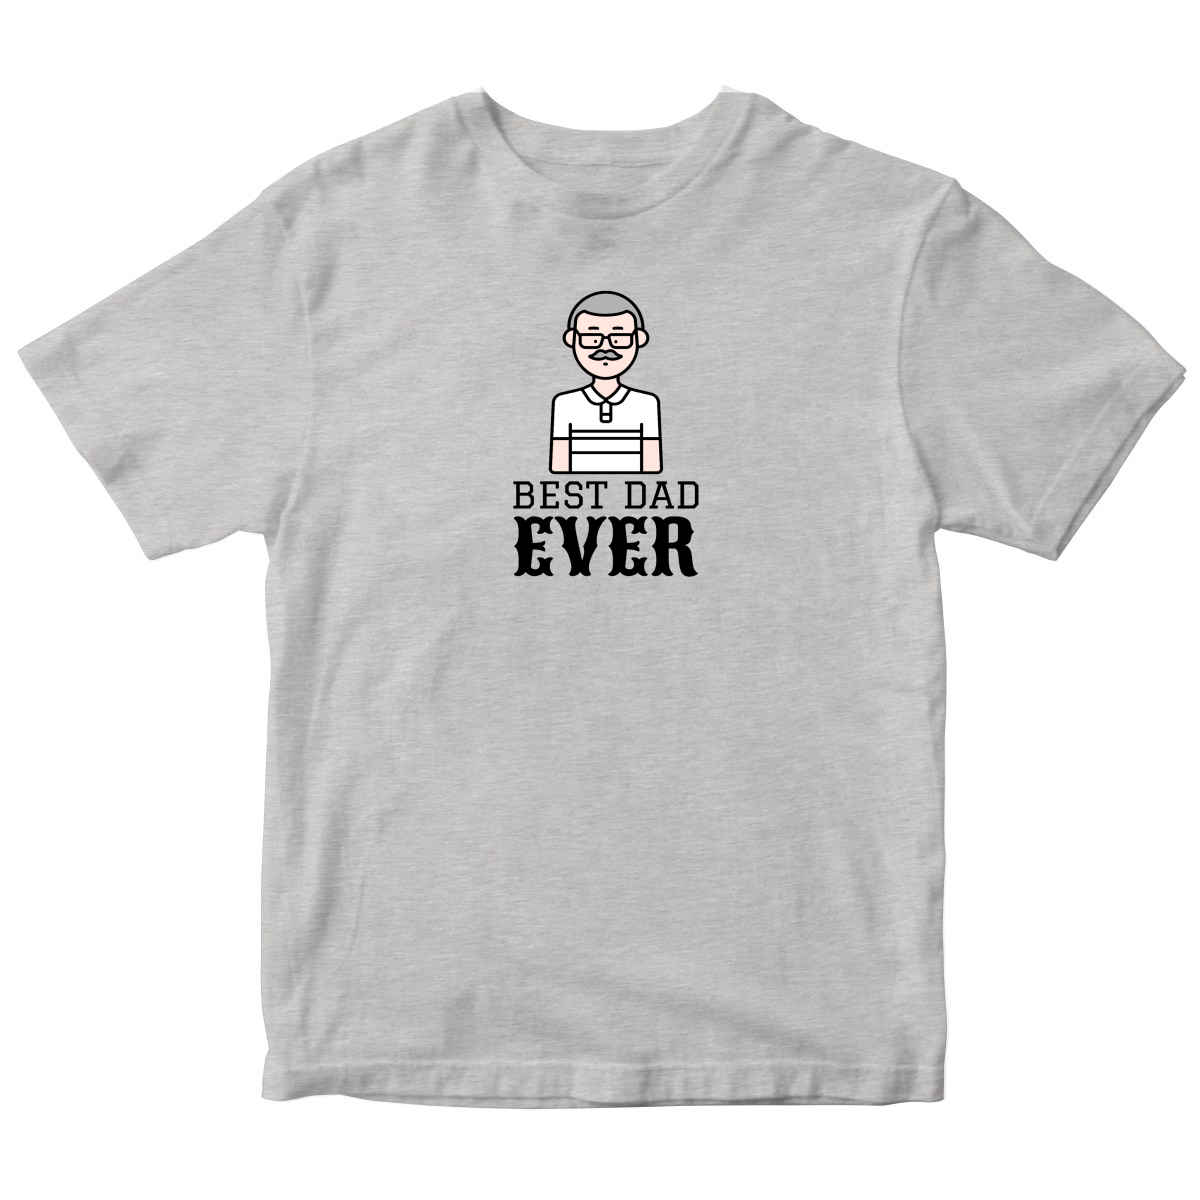 Best Dad Ever Toddler T-shirt | Gray